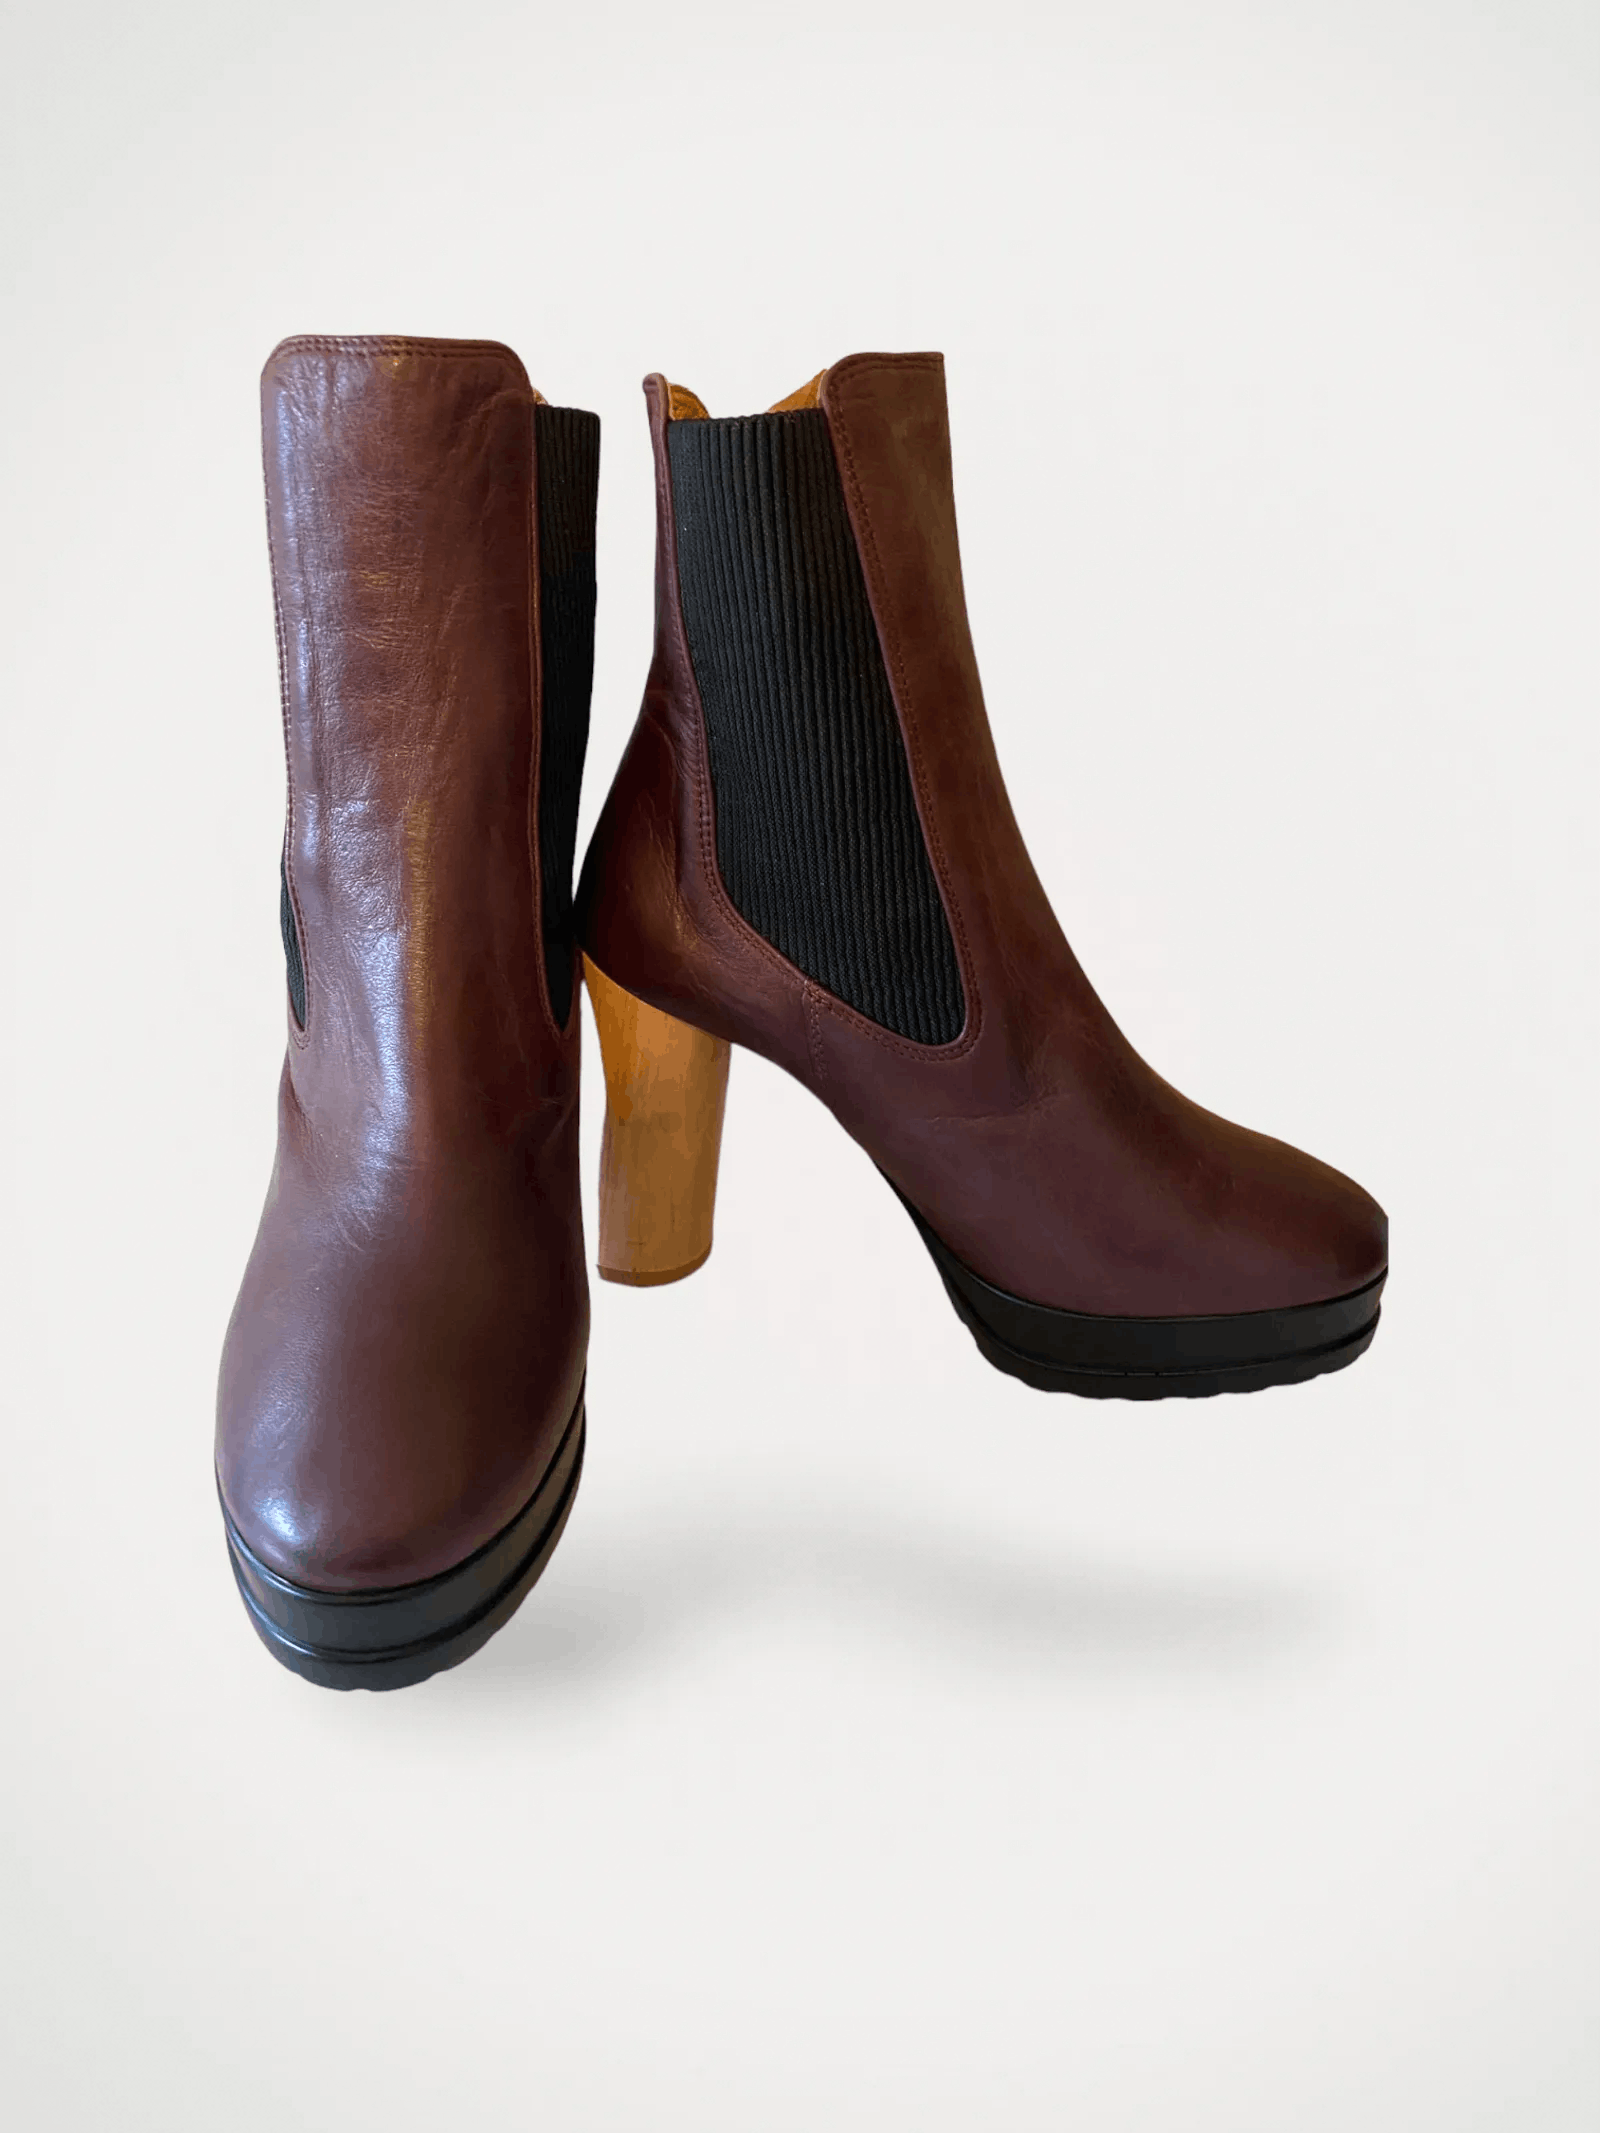 Rodebjer Rodebjer Boots | Grailed